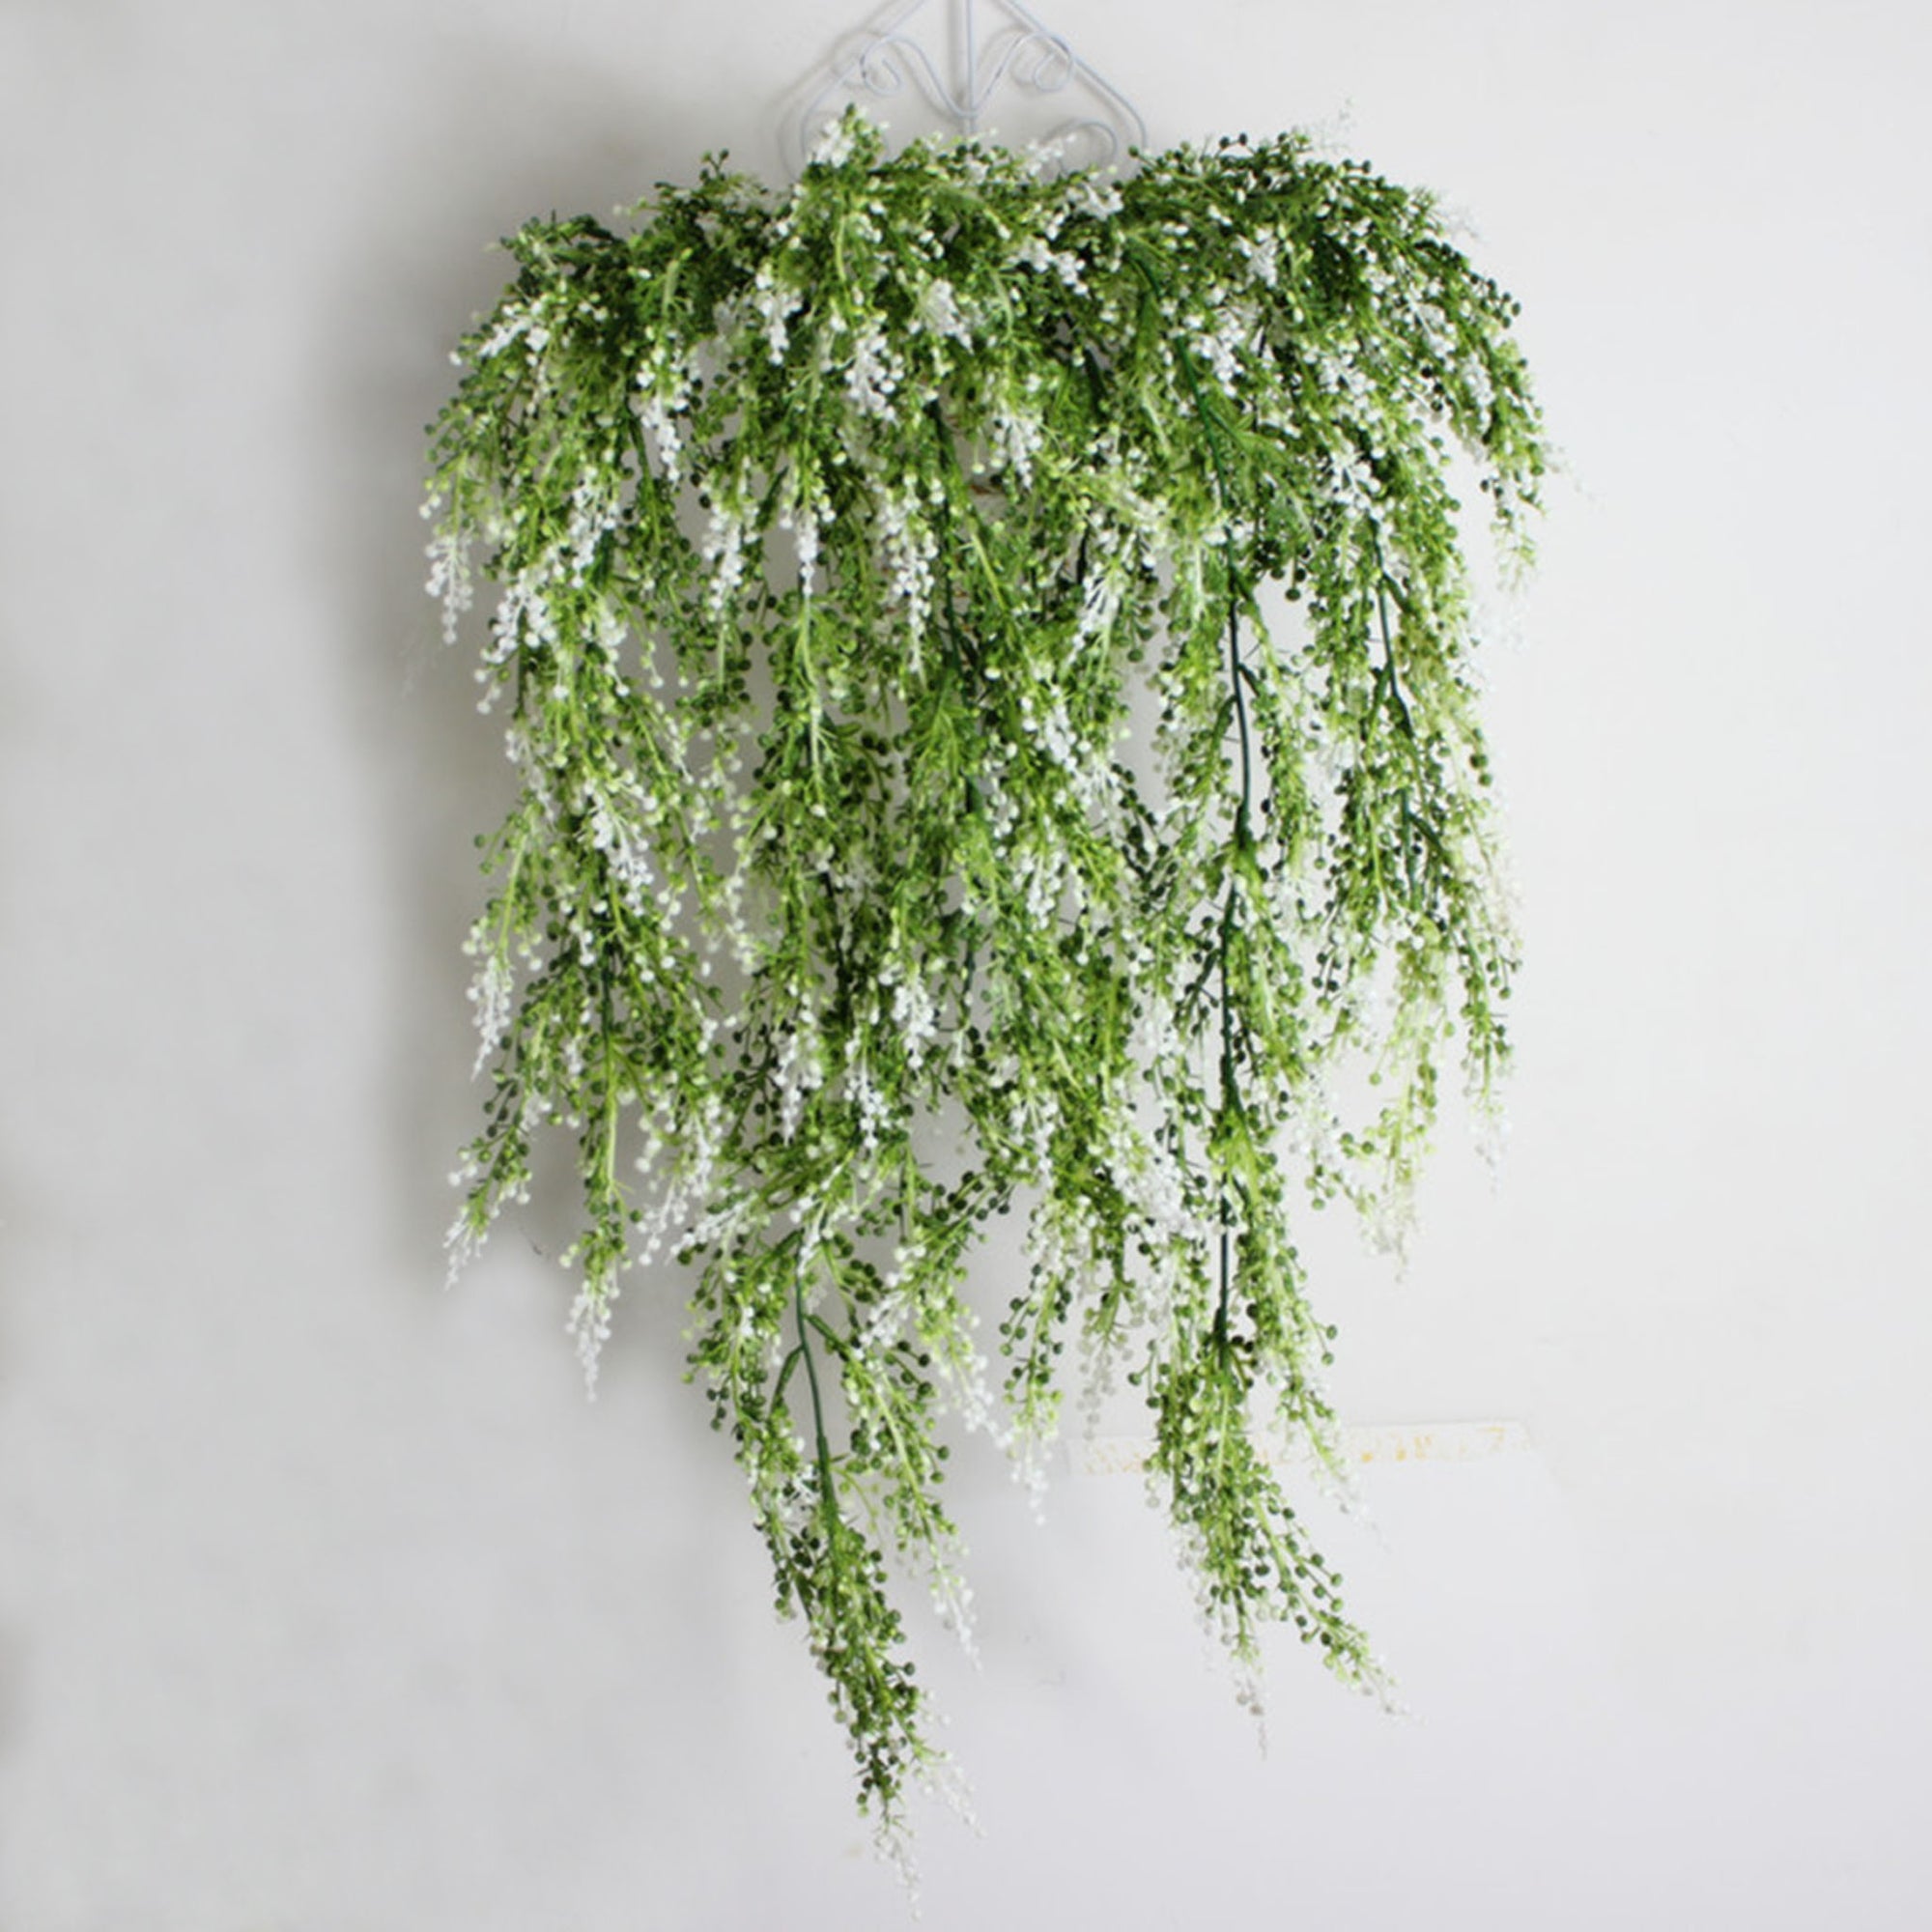 Plastic Plants Outdoor Basket Wall Hanging Plants Plastic Vines for Wedding  Backdrops Indoor Wall Decorations 2 Bunches YLM-5513 